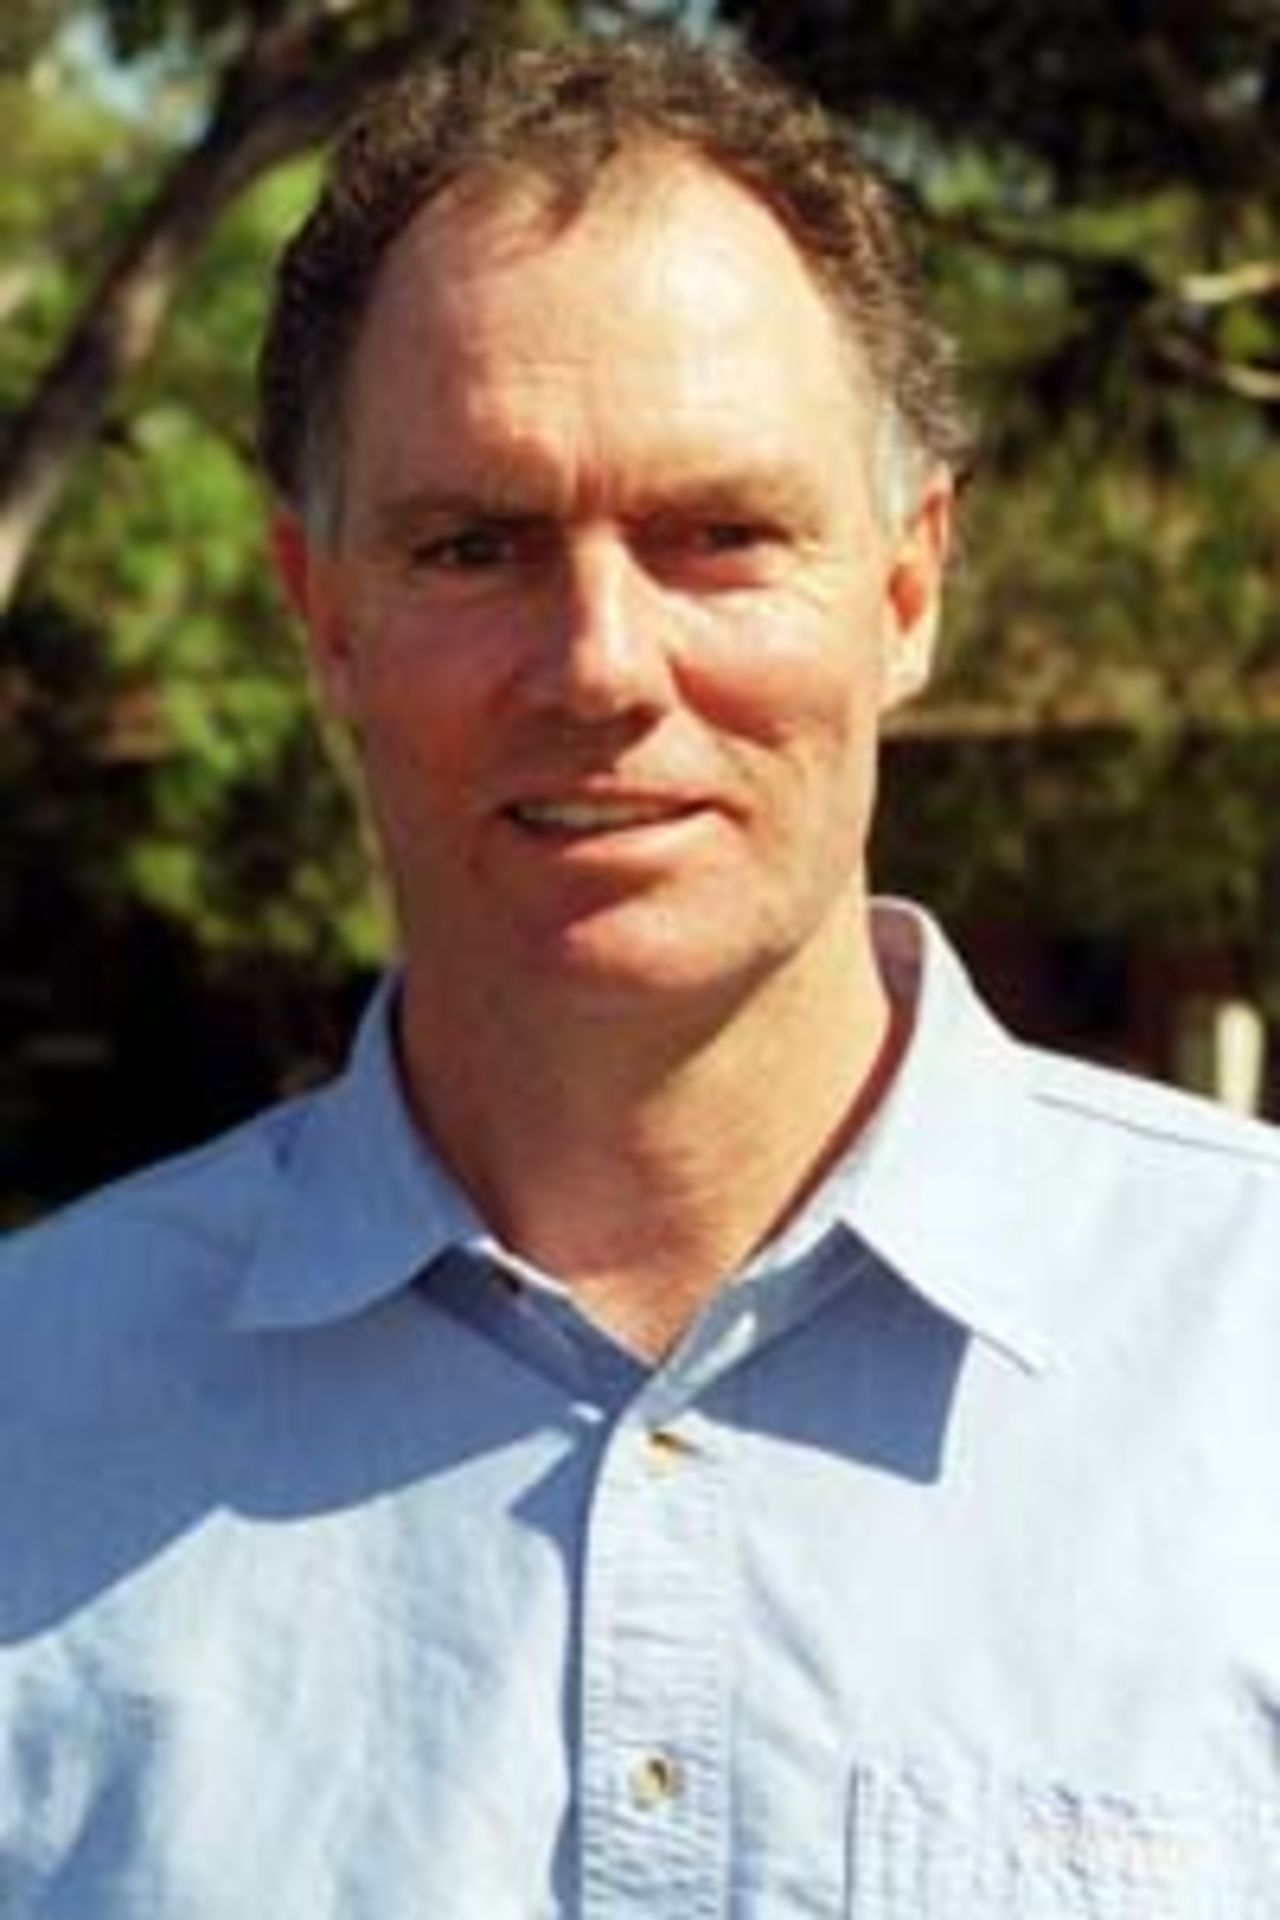 11 Apr 2000: Former Australian Captain, Greg Chappell during the Australian Cricket Board's (ACB) Level III Coaching course which was held at the Caulfield Grammer School, Caulfield, Australia